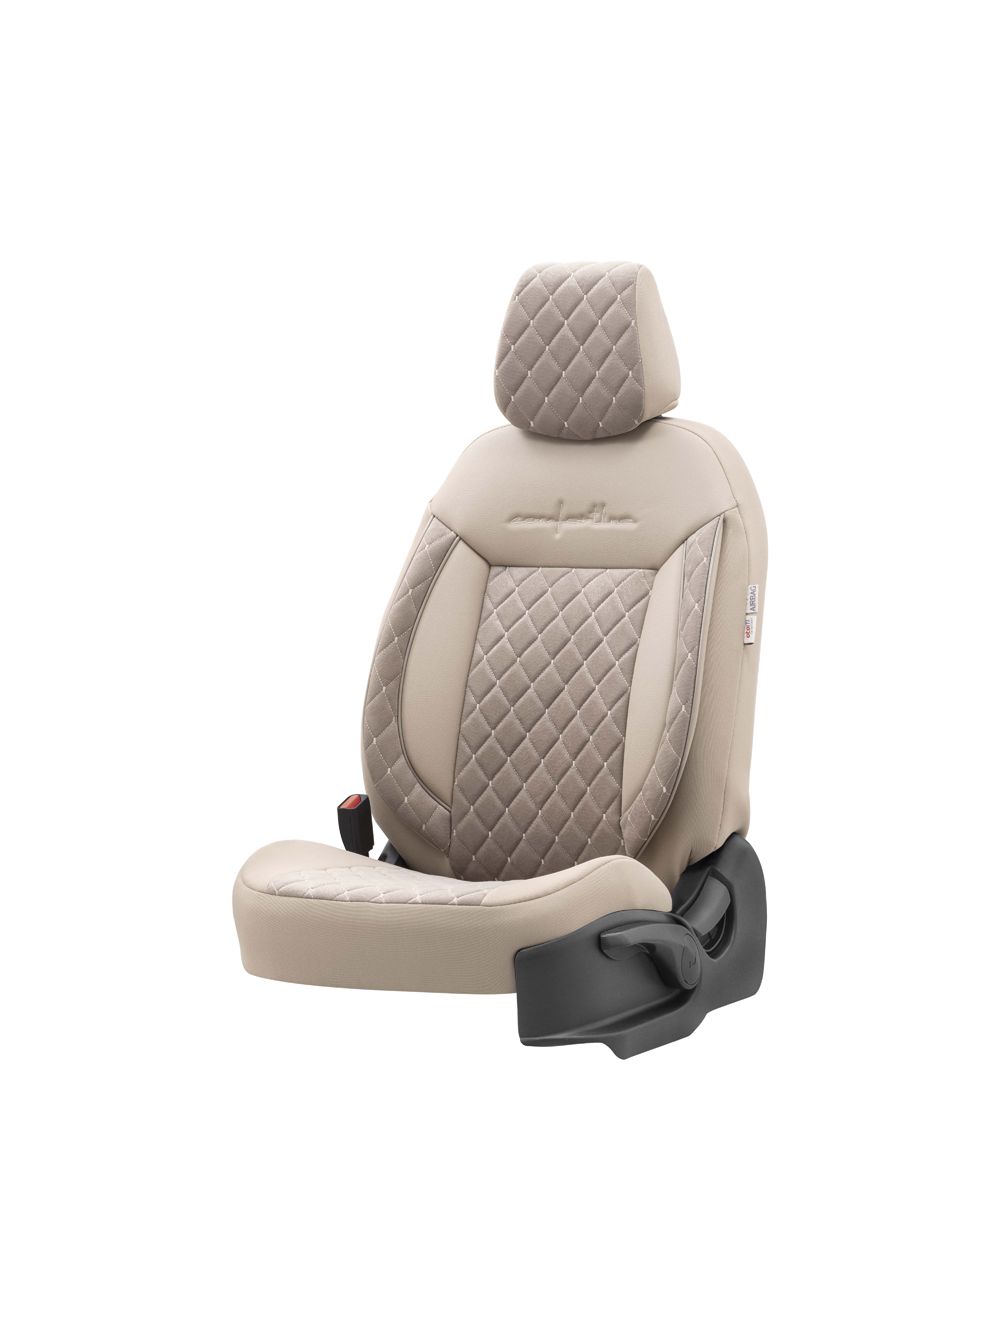 Seat Covers & Accessories - Buy Seat Covers & Accessories at Best